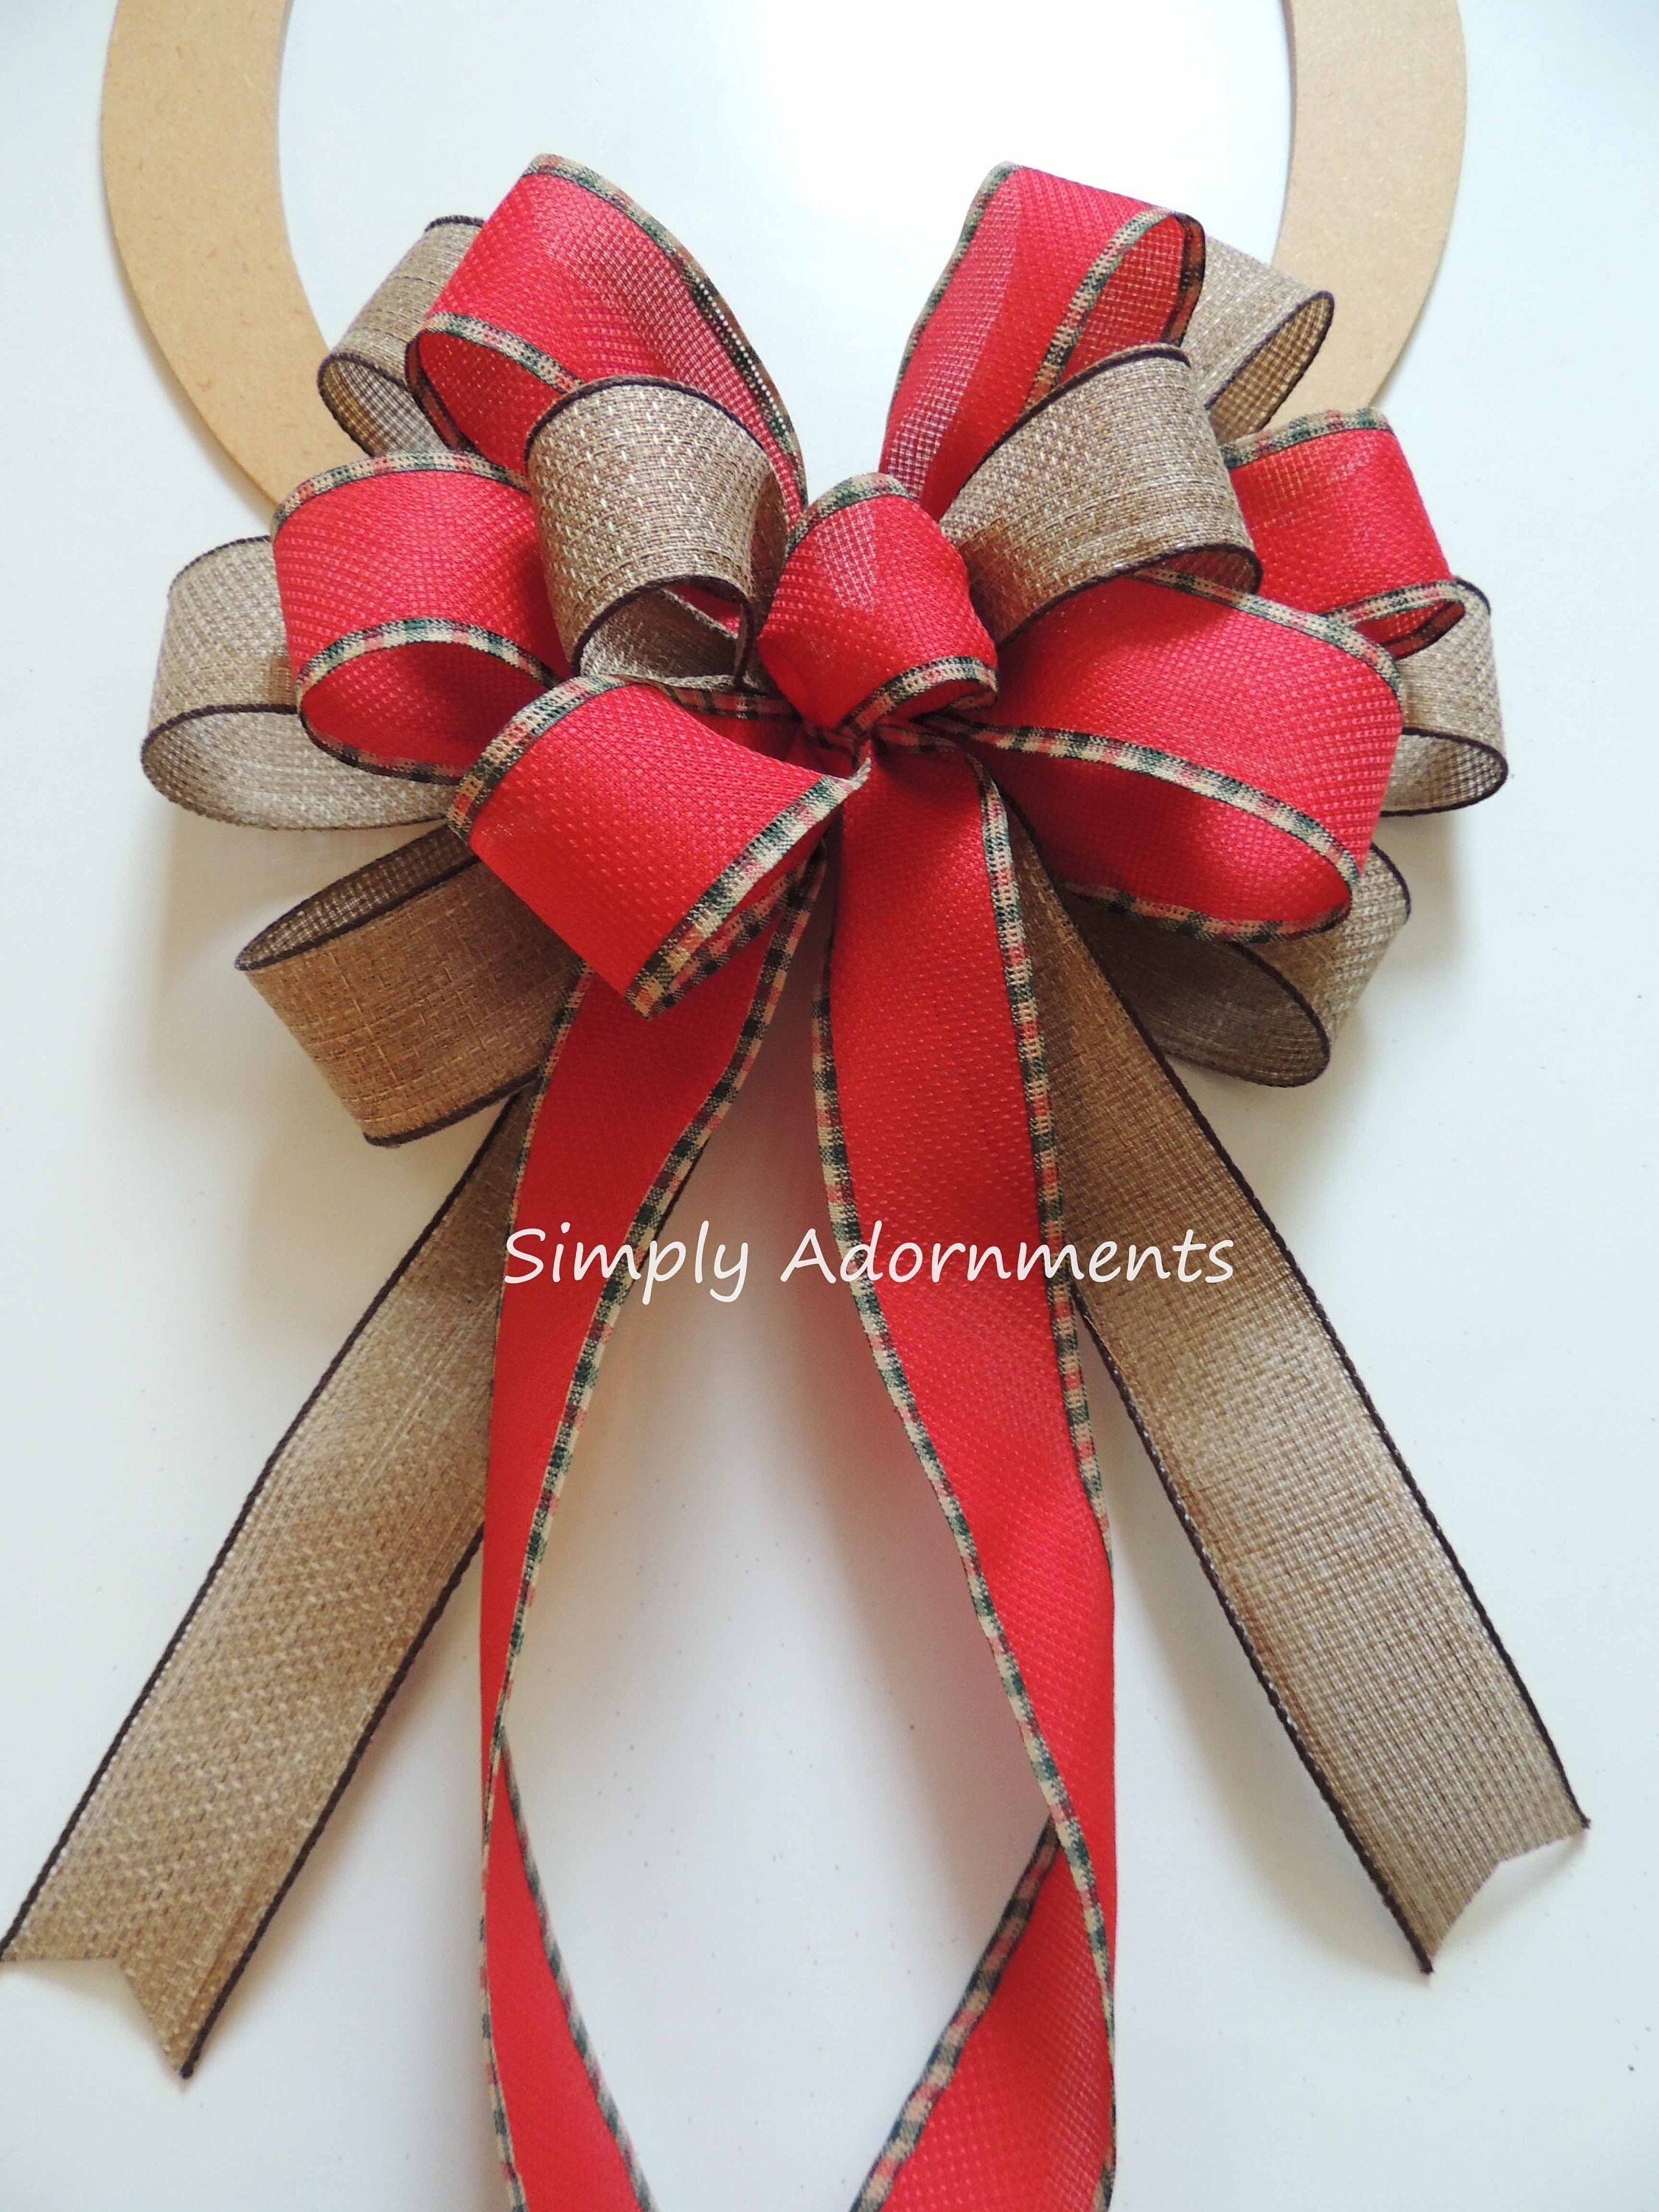 Bow Maker for Ribbon and Wreath, Wooden Bow Making Tool for Christmas Bows  Gift Wrapping Wreath Bows Trims Decorations Hair Bows Party Decor 